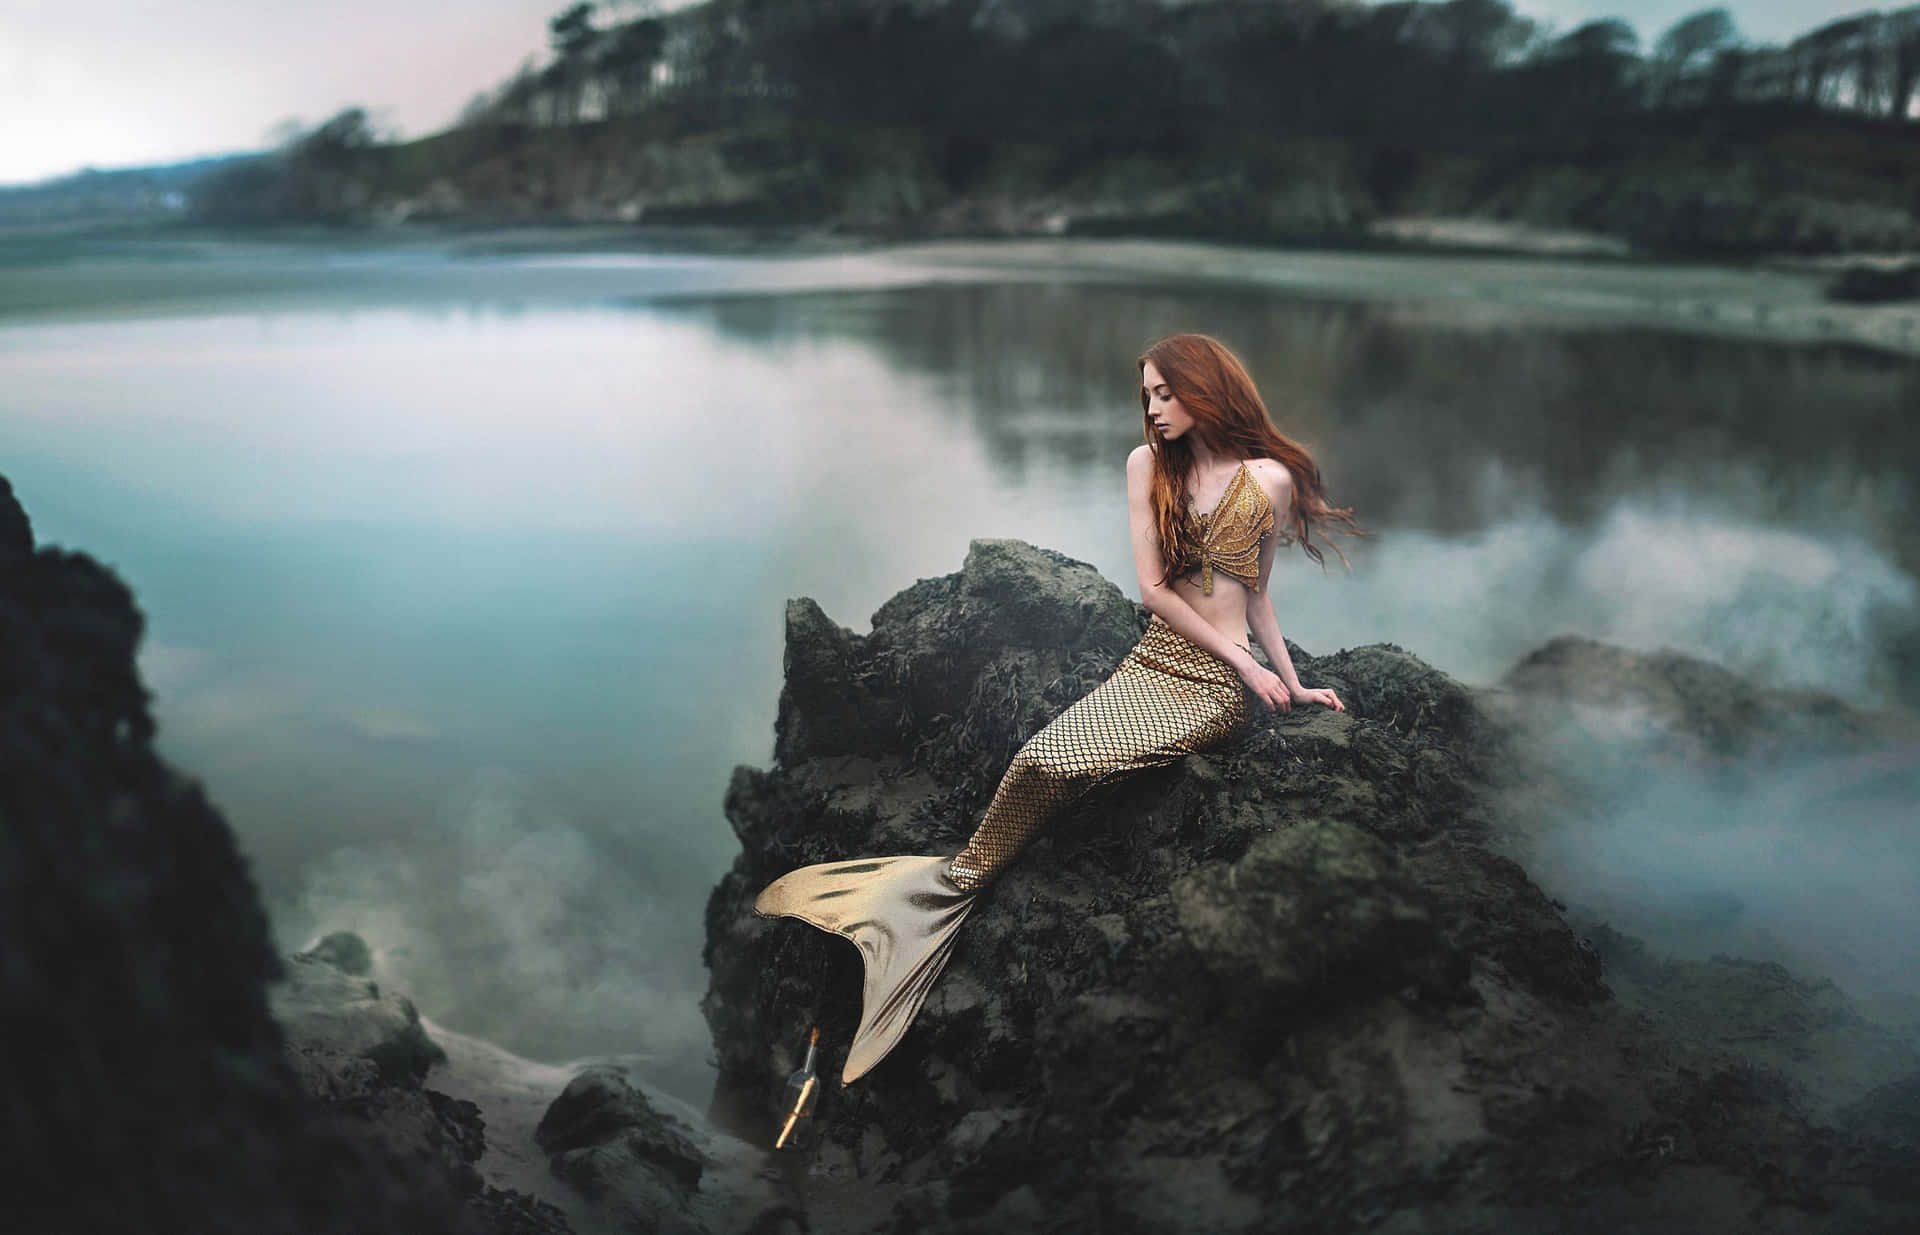 Make a splash and discover a world of fantasy with Real Life Mermaid